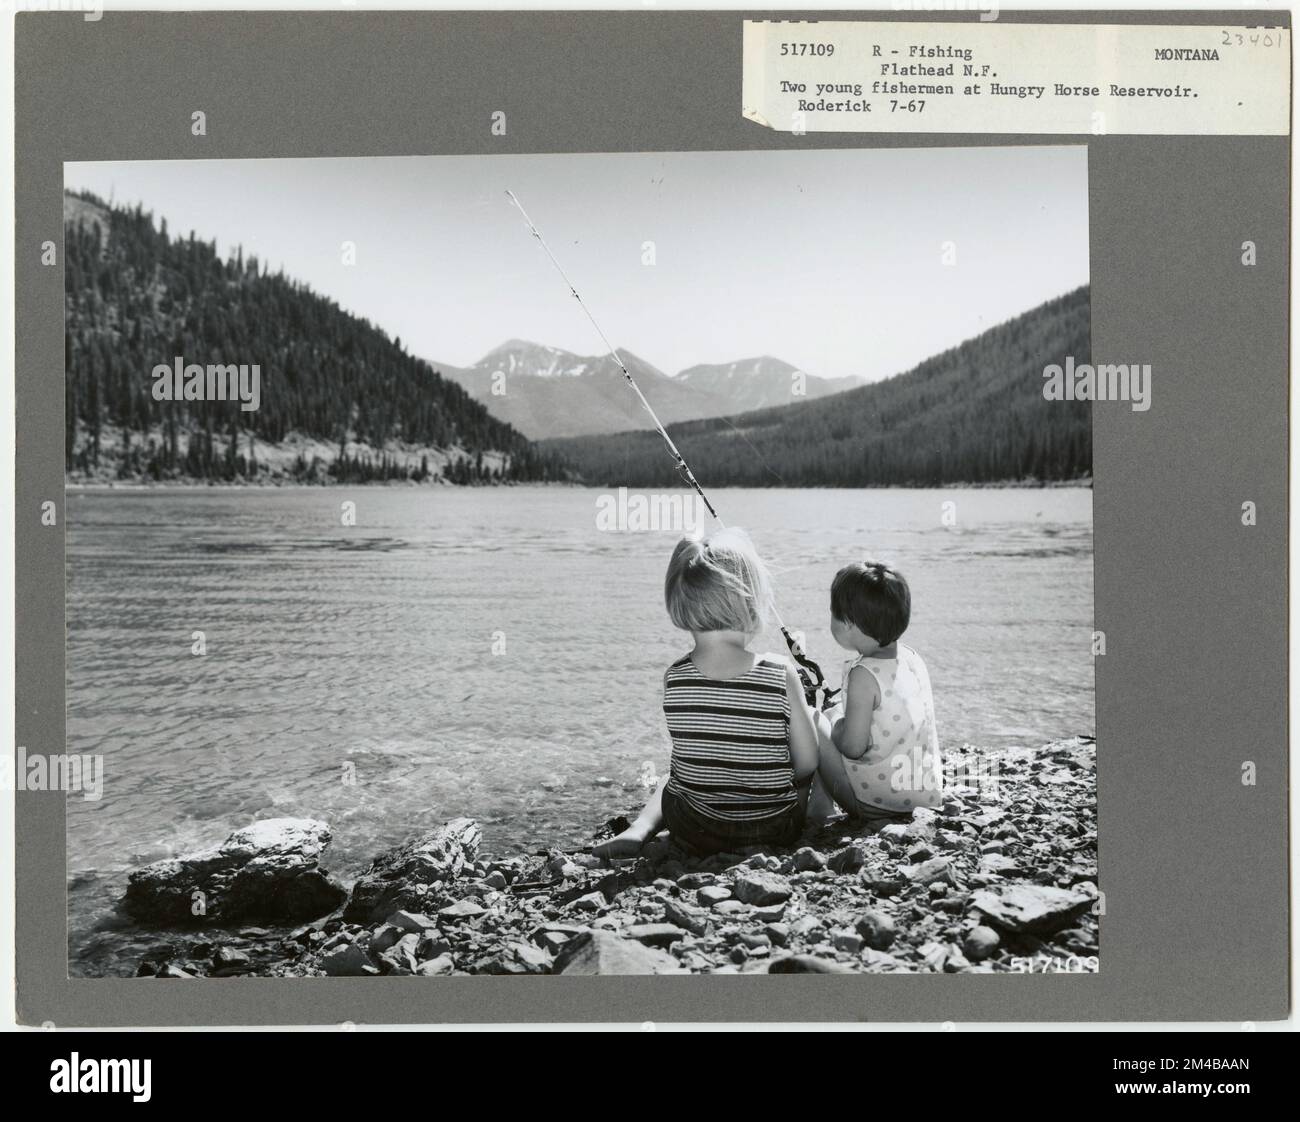 Fishing - Montana. Photographs Relating to National Forests, Resource Management Practices, Personnel, and Cultural and Economic History Stock Photo